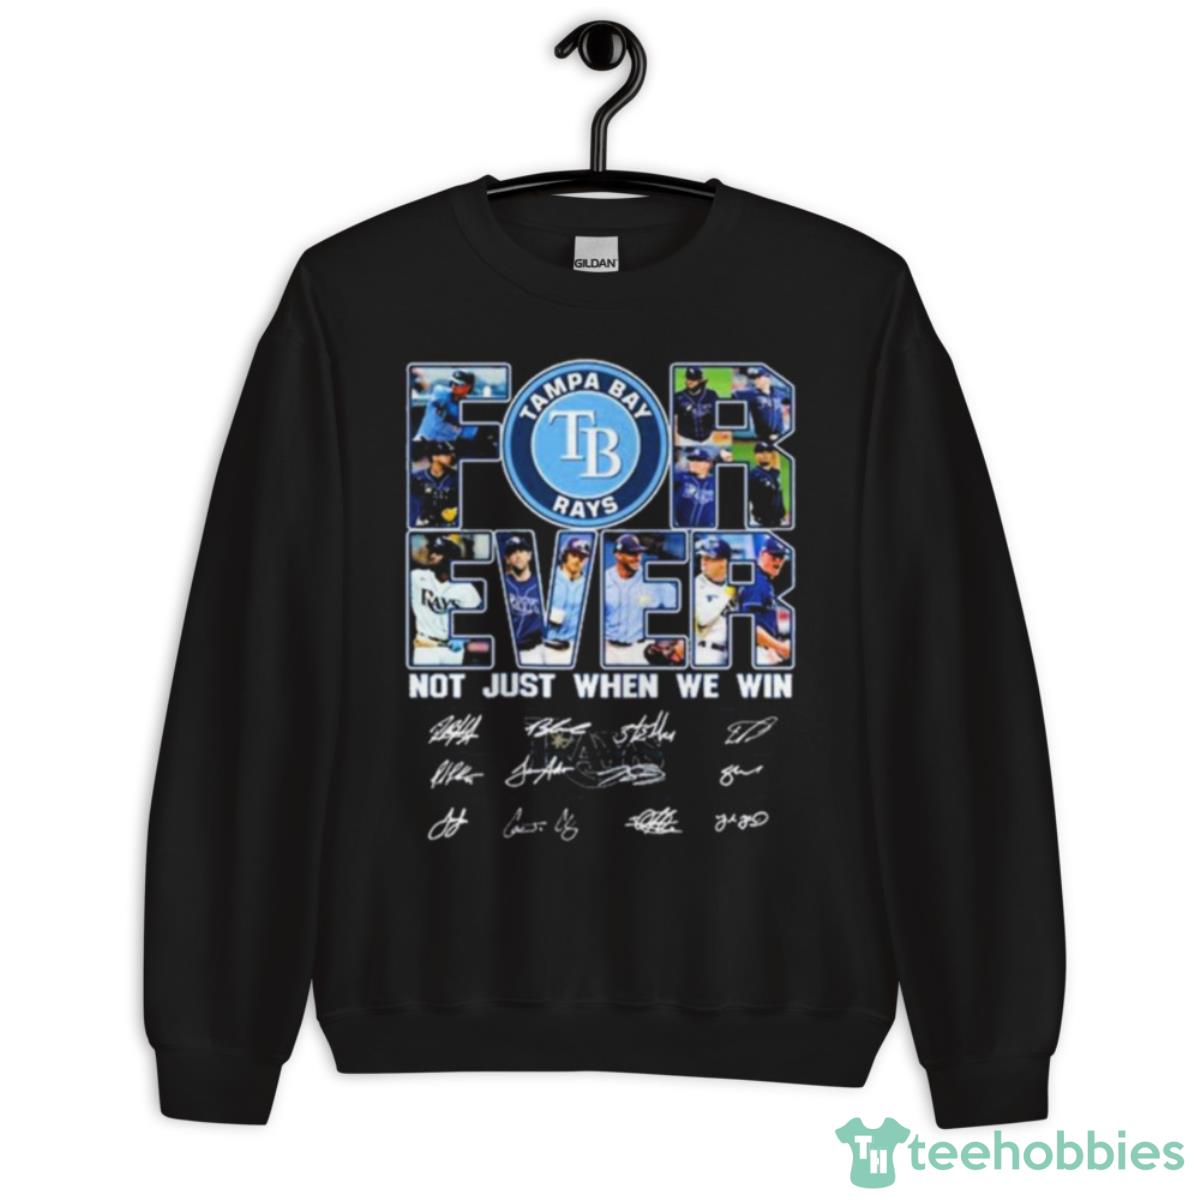 For Ever Tampa Bay Rays Not Just When We Win Signature Shirt - Unisex Crewneck Sweatshirt